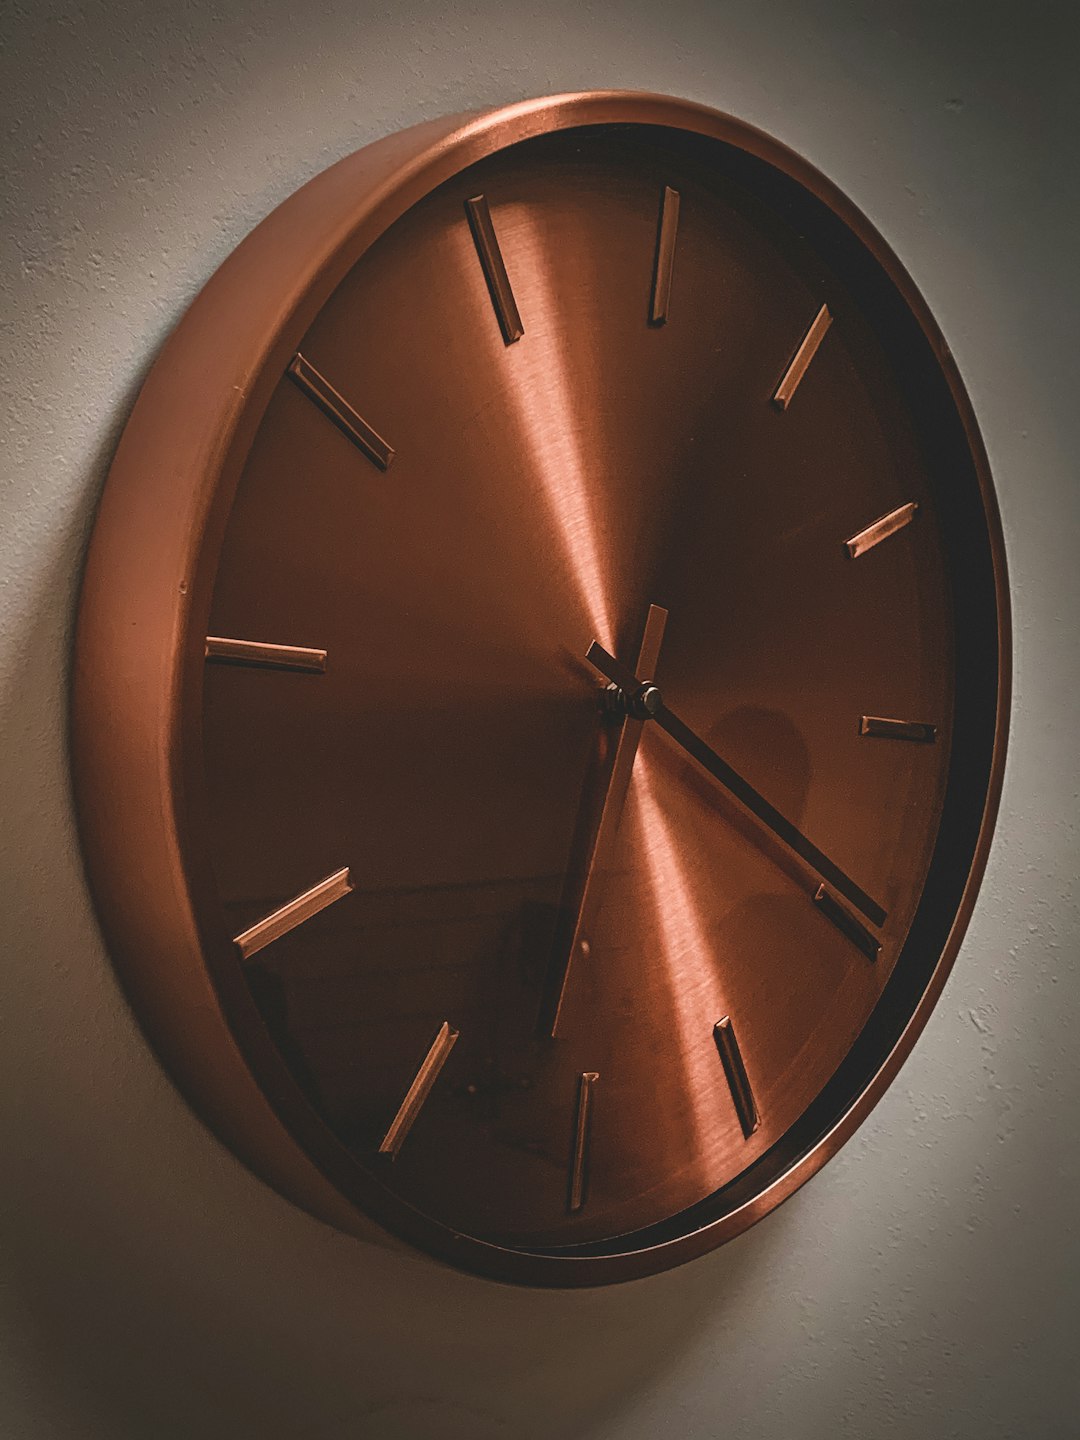 brown wooden round analog wall clock